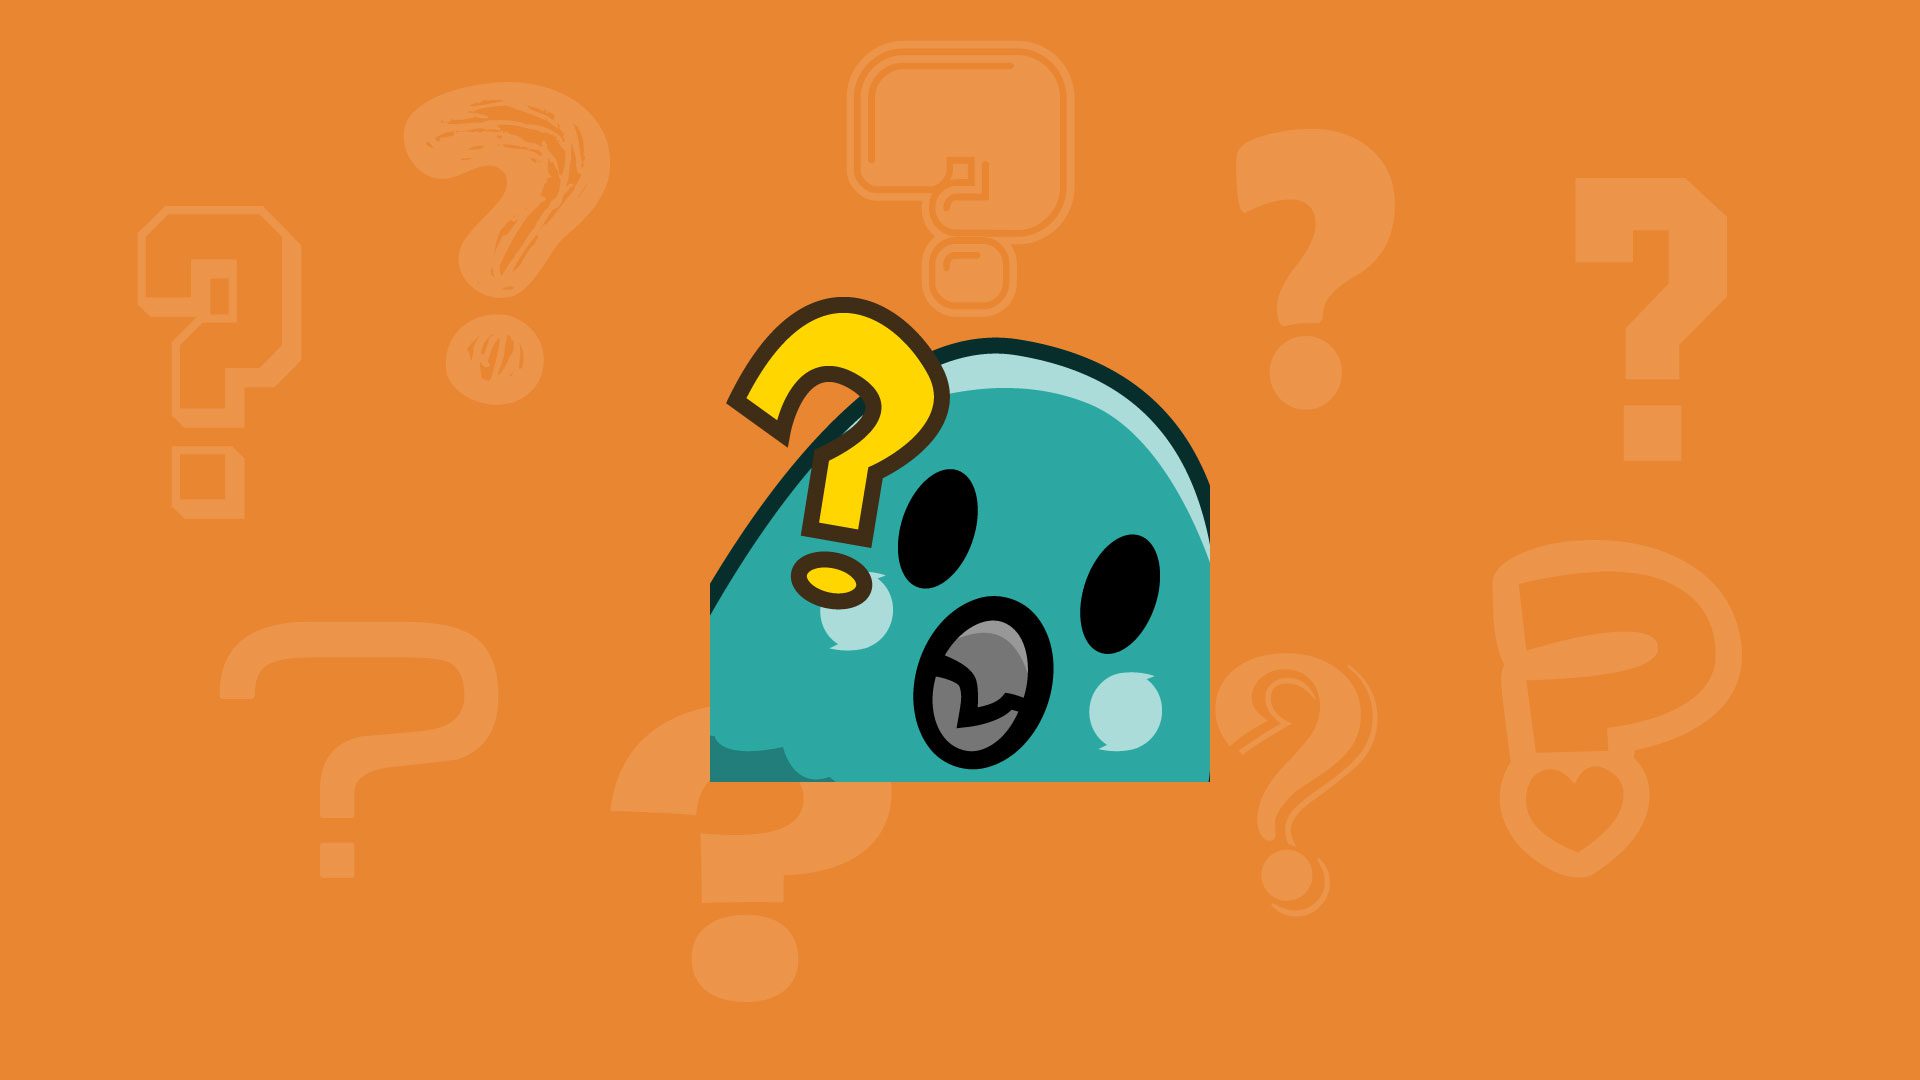 A teal parrot emote with small eyes, a leaning mouth, and a yellow question mark above its head. There's an orange background with a question mark design. This introduces a list of very hard riddles for kids.